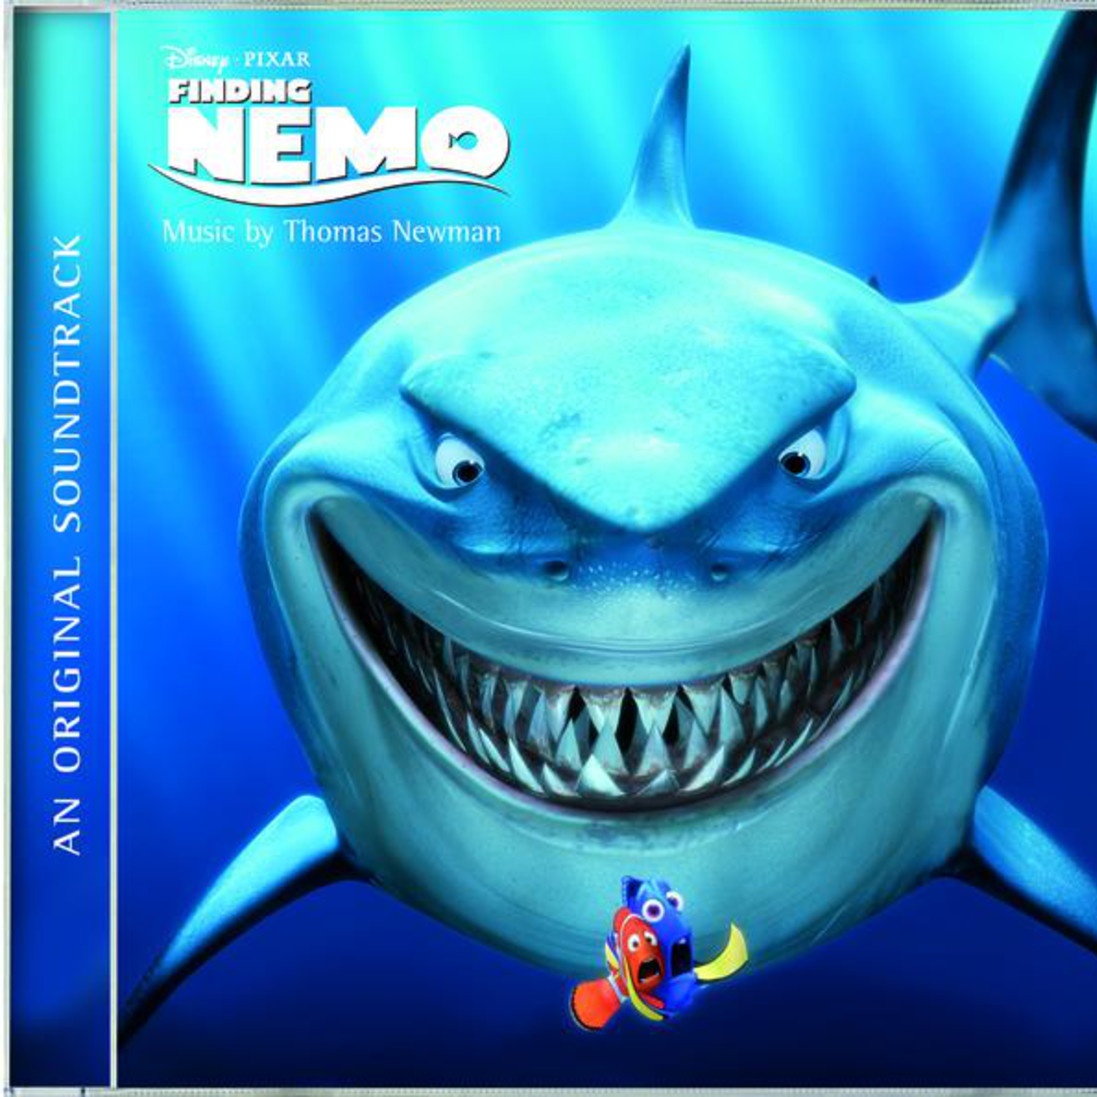 Finding Nemo (Score from the Motion Picture)